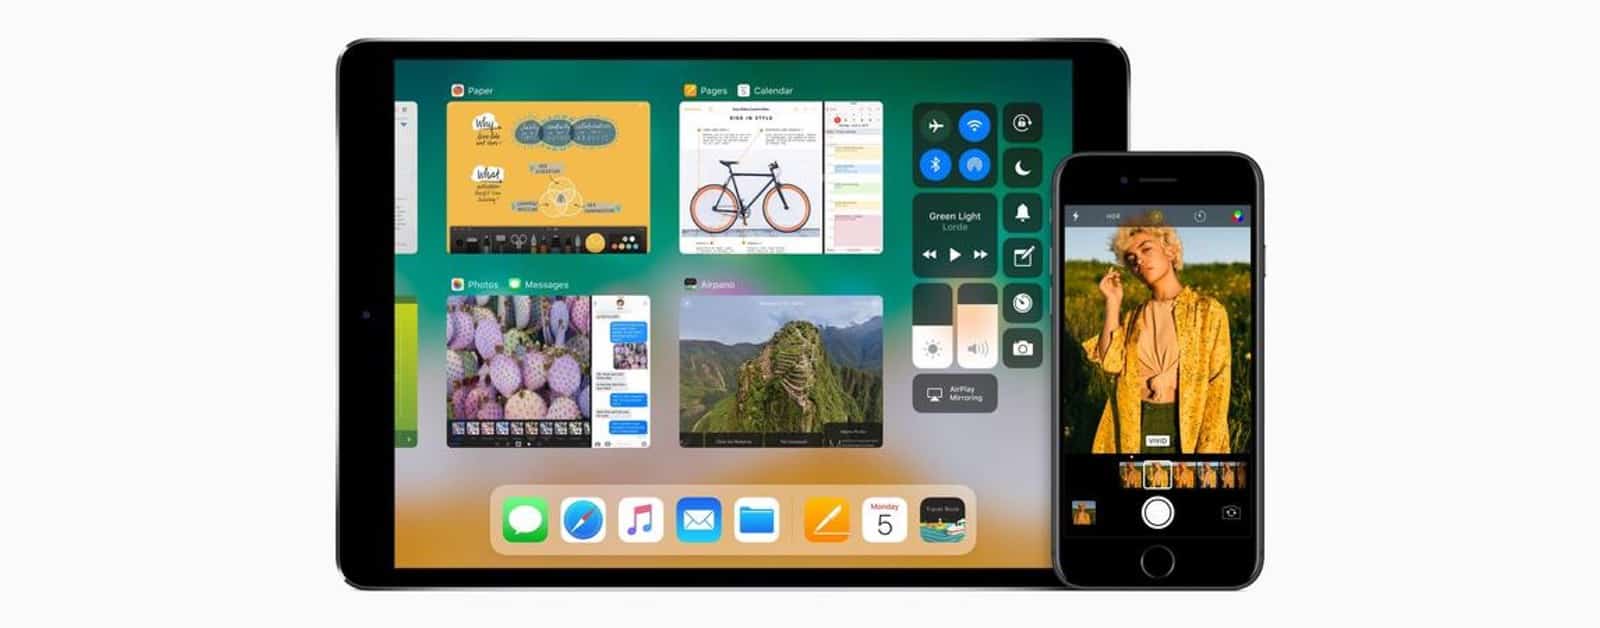 How to Downgrade from iOS 11 Beta